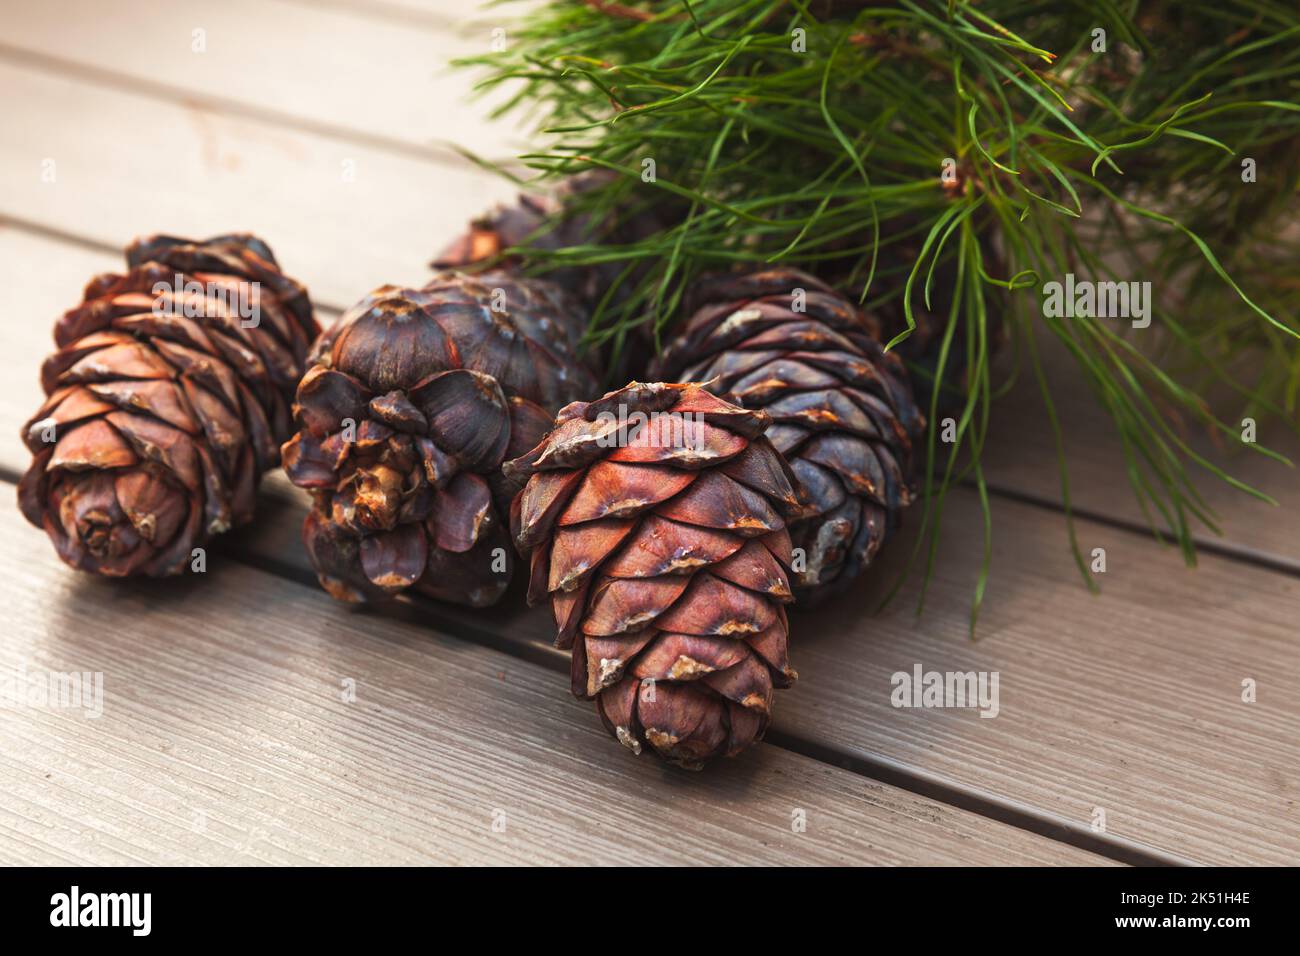 Siberian pine branch and cones lay on a wooden table, close up photo with selective soft focus Stock Photo